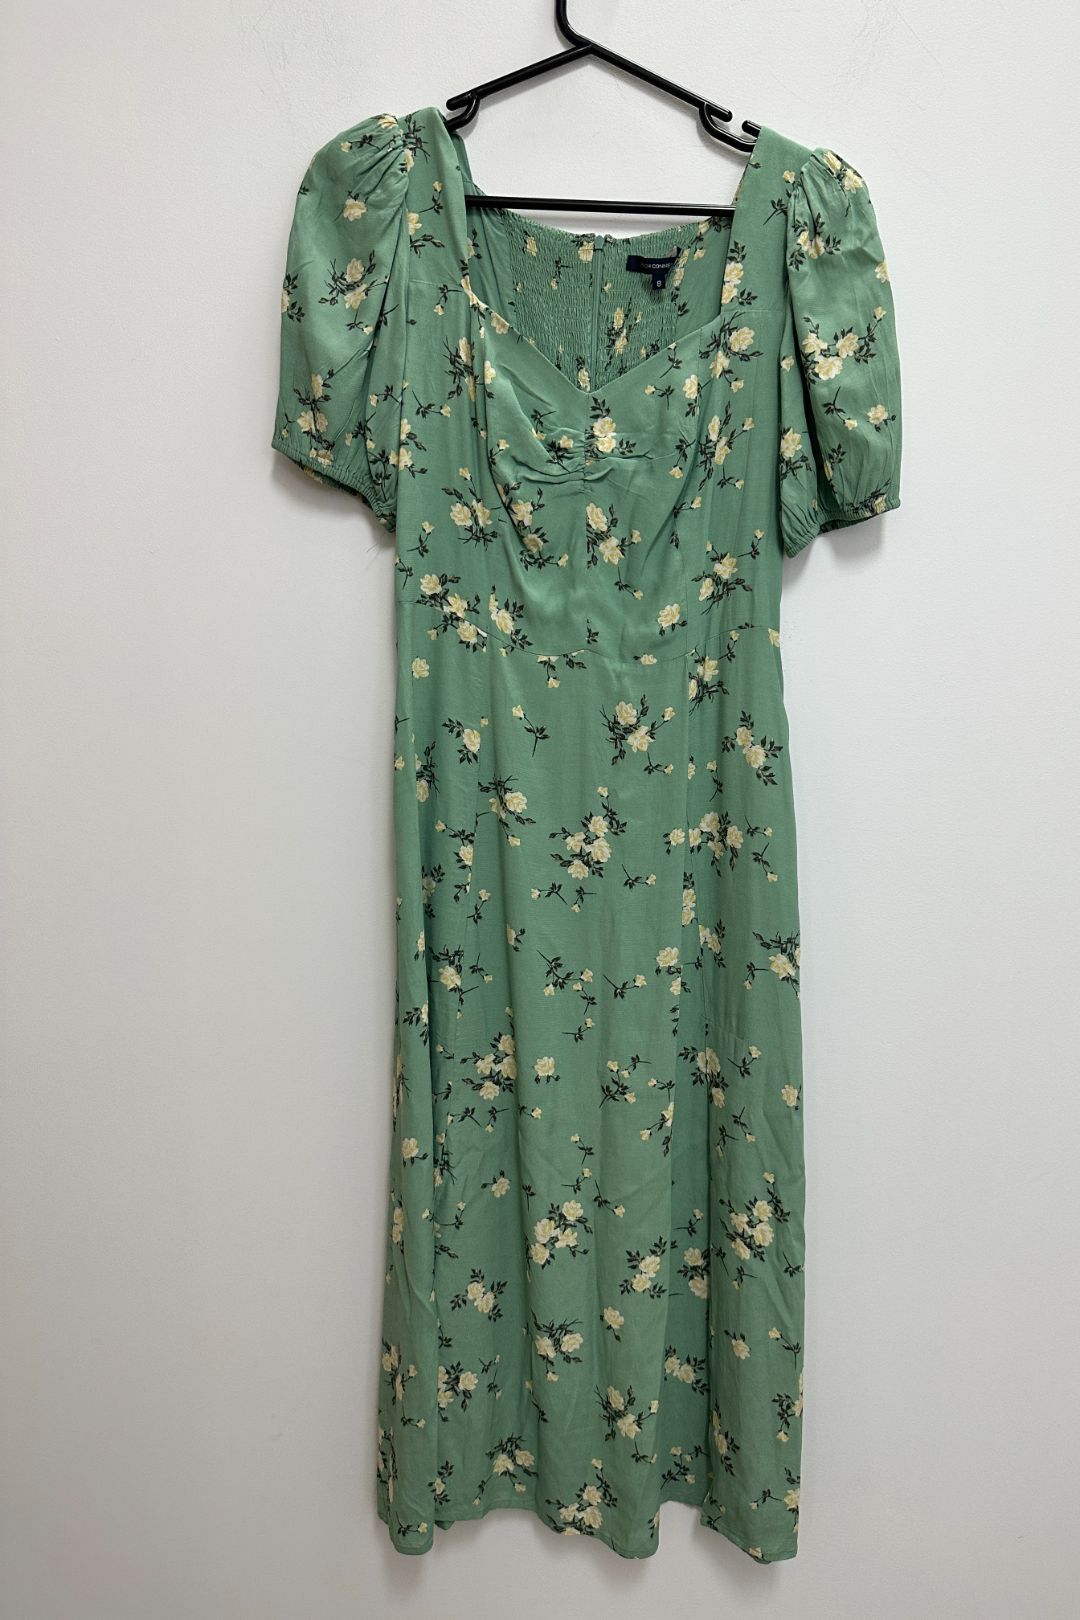 French Connection Floral Sweetheart Summer Midi Dress in Green